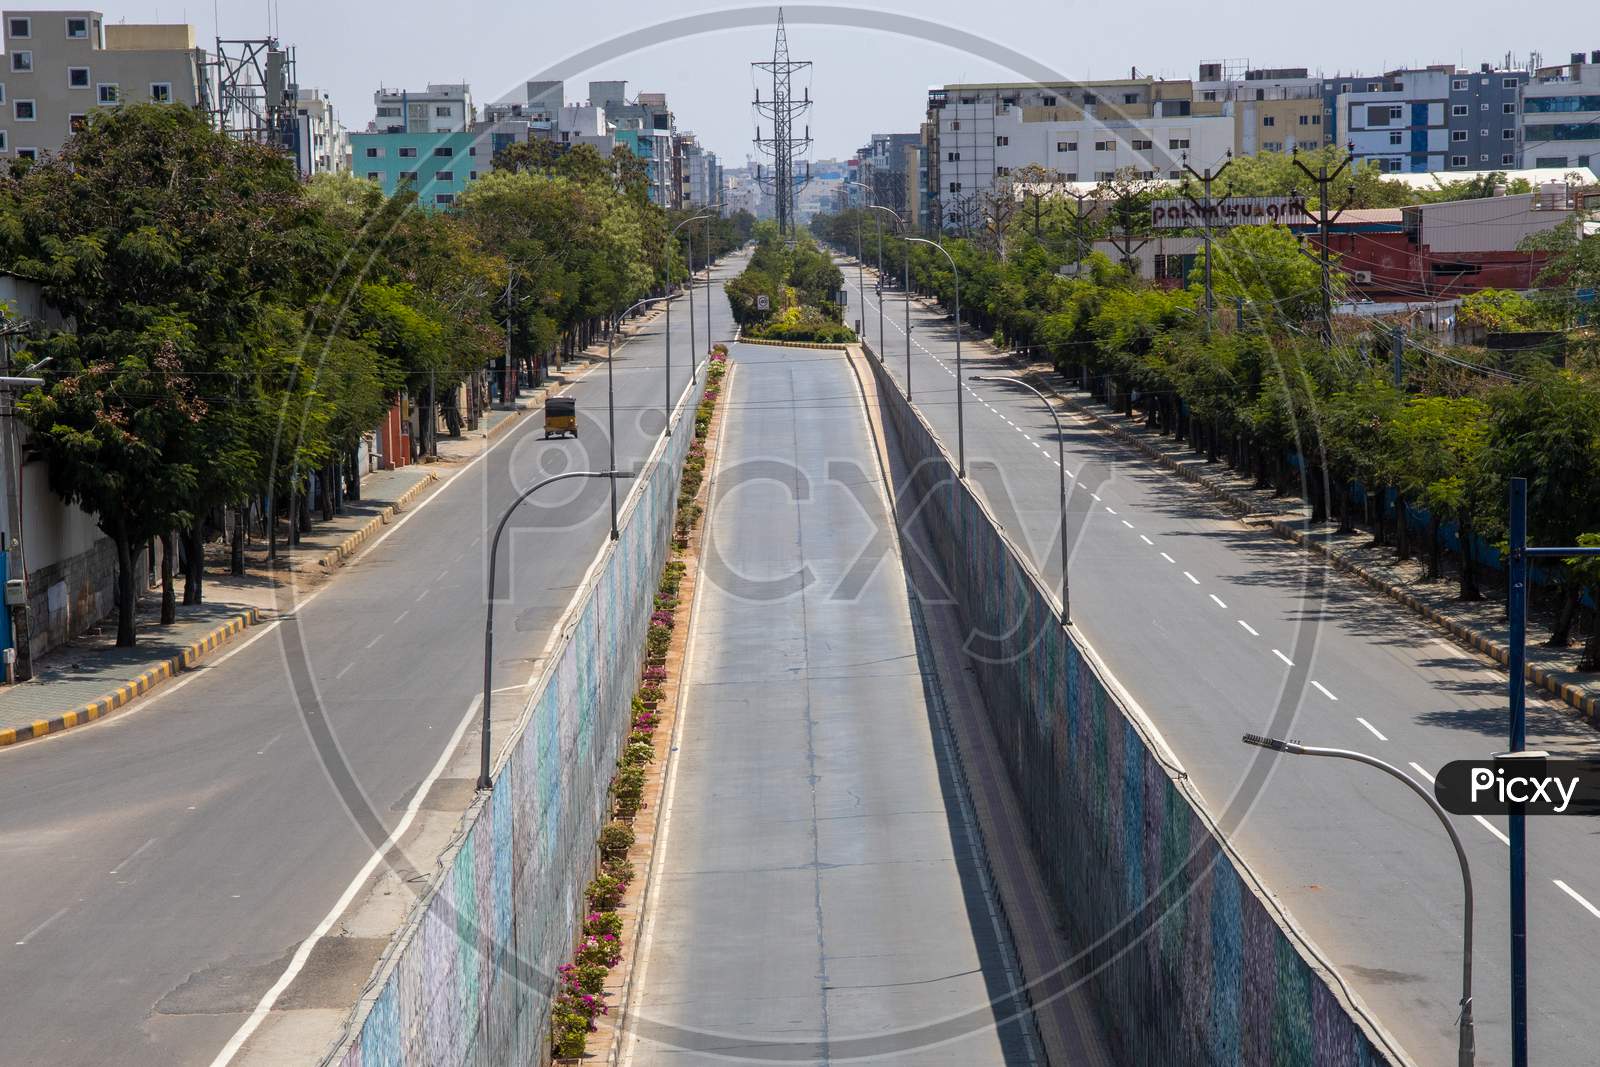 Janata Curfew , Deserted Roads At Busy Madapur 100 feet road  in Hyderabad  As Indian Prime Minister Narendra Modi Called For a 14 Hour Janta  Curfew Or Self-imposed  Quarantine To Break The  Highly Contagious  COVID 19 Or Corona Virus Spread